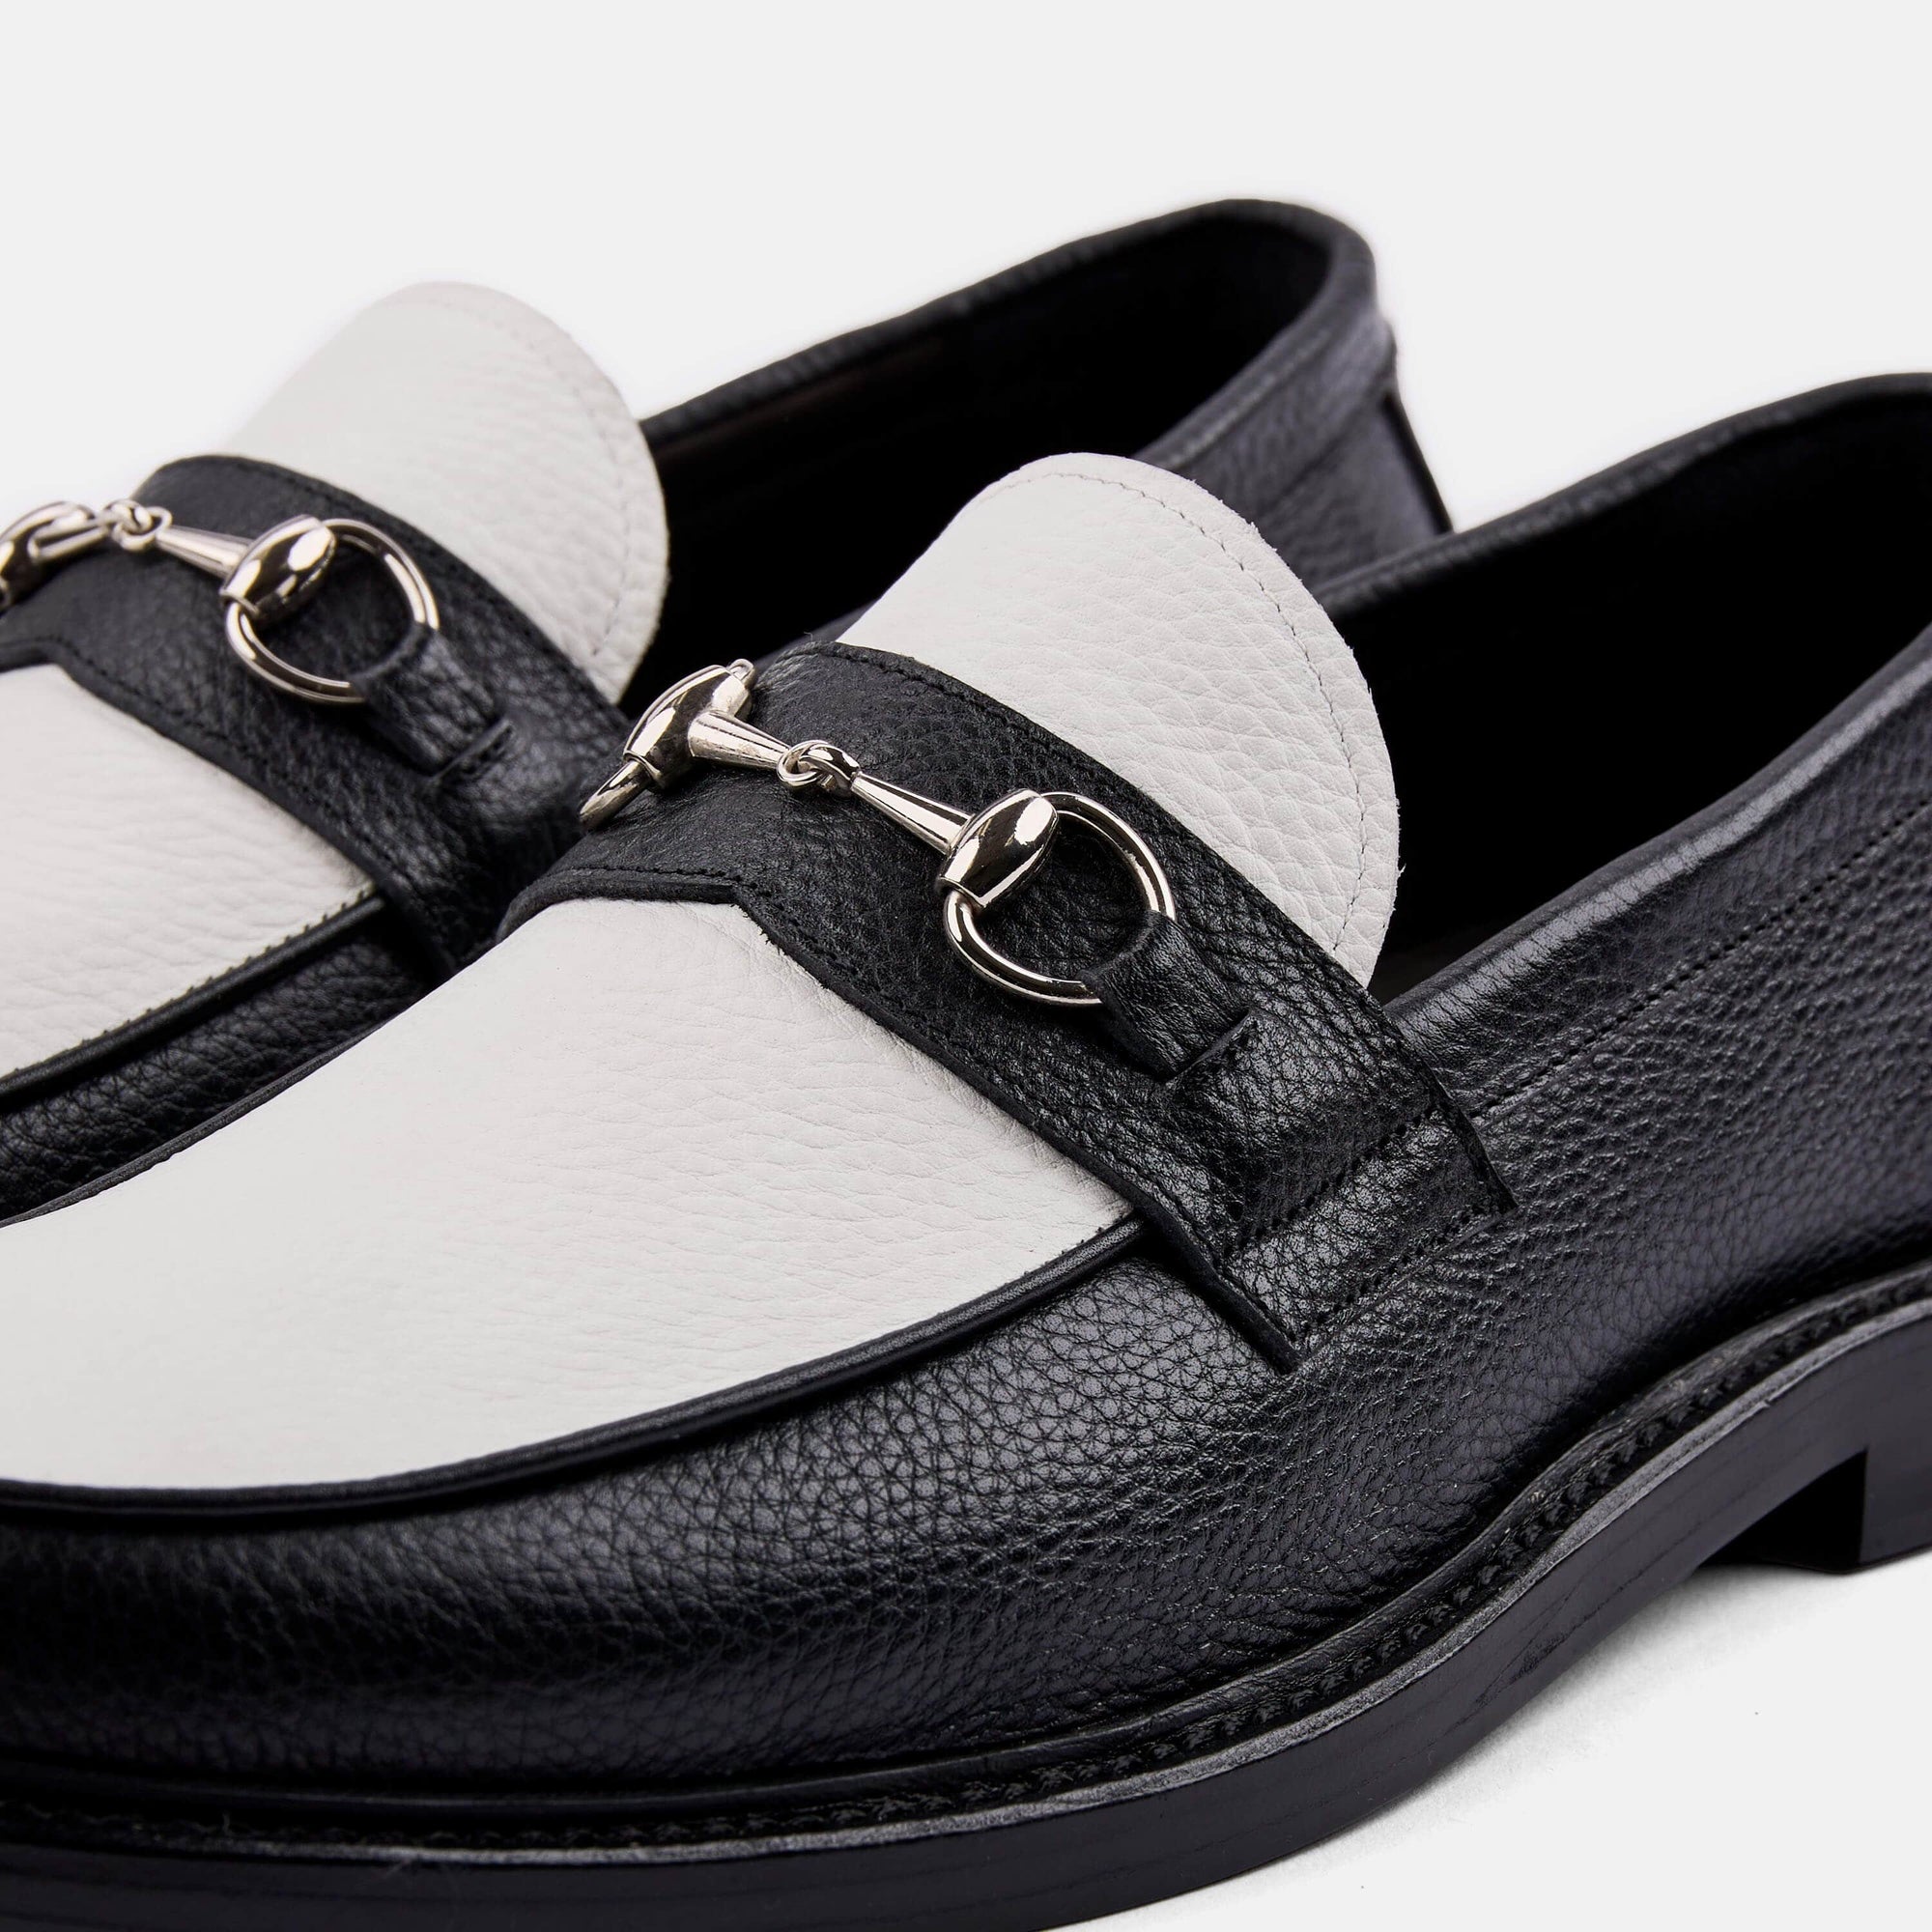 Boardwalk Black and White Horse-Bit Loafers